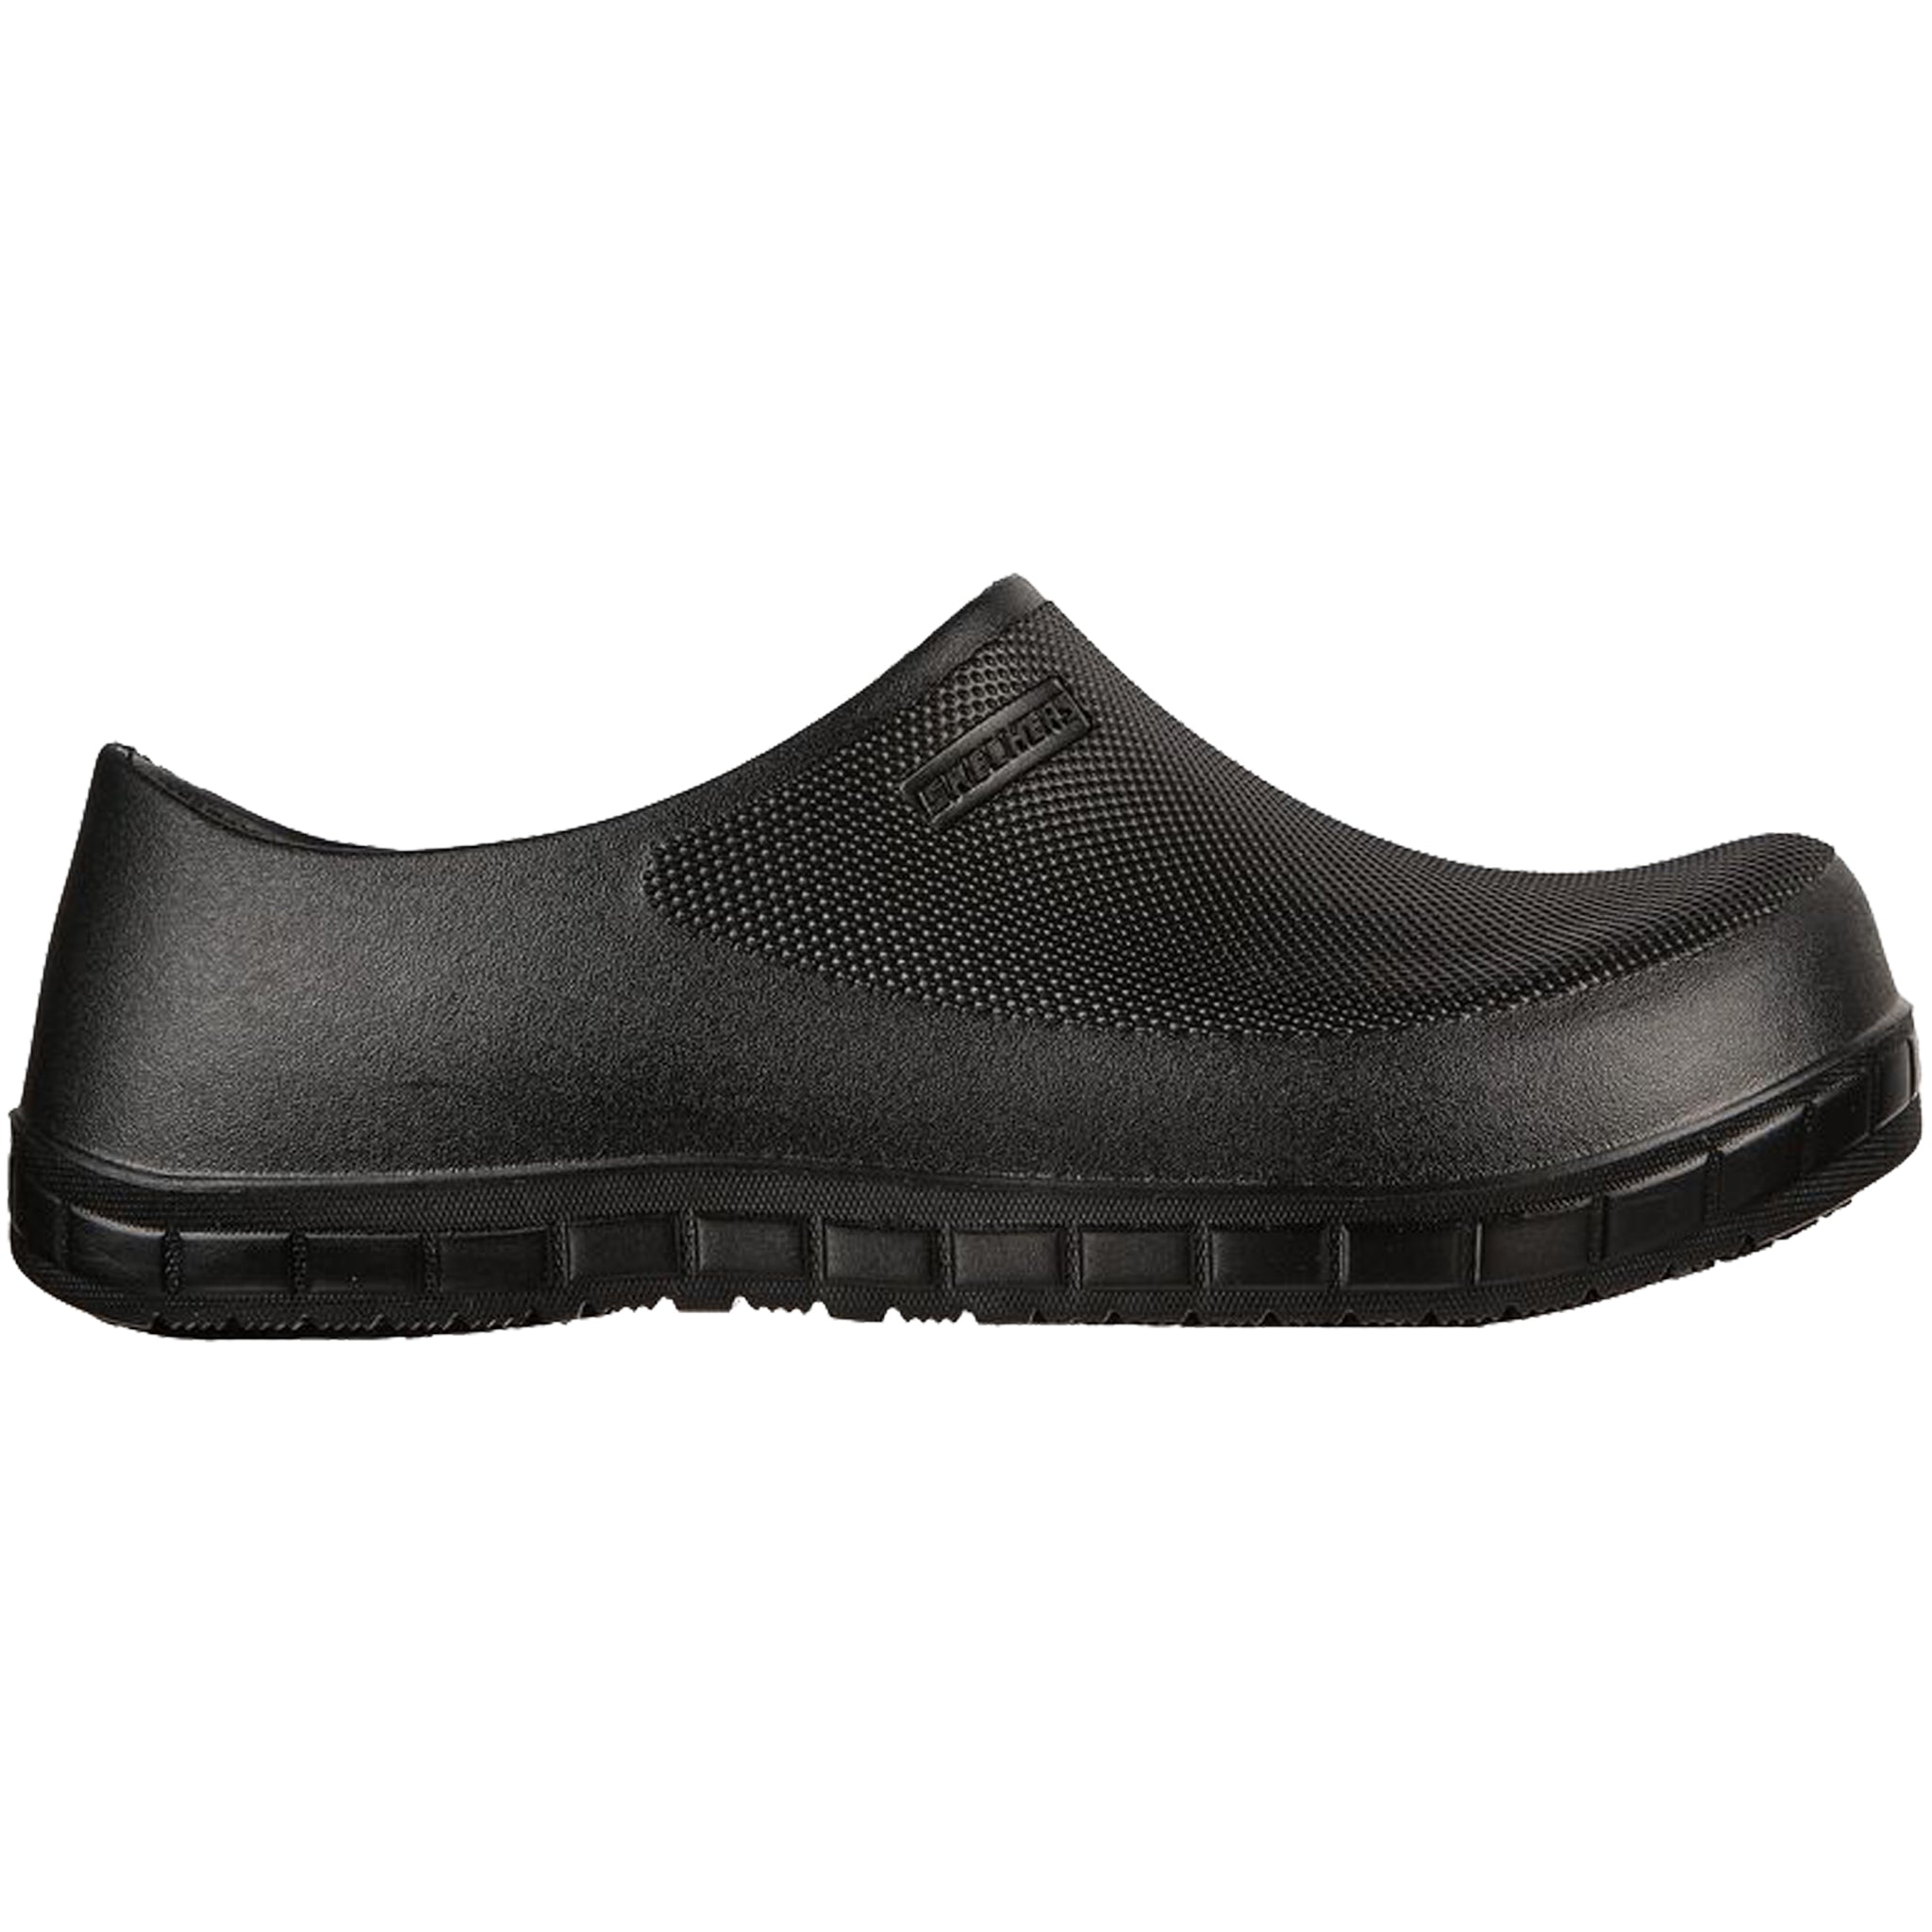 Skechers Women's 108048 Evaa Slip Resistant Slip On Work Shoes – That Shoe Store and More